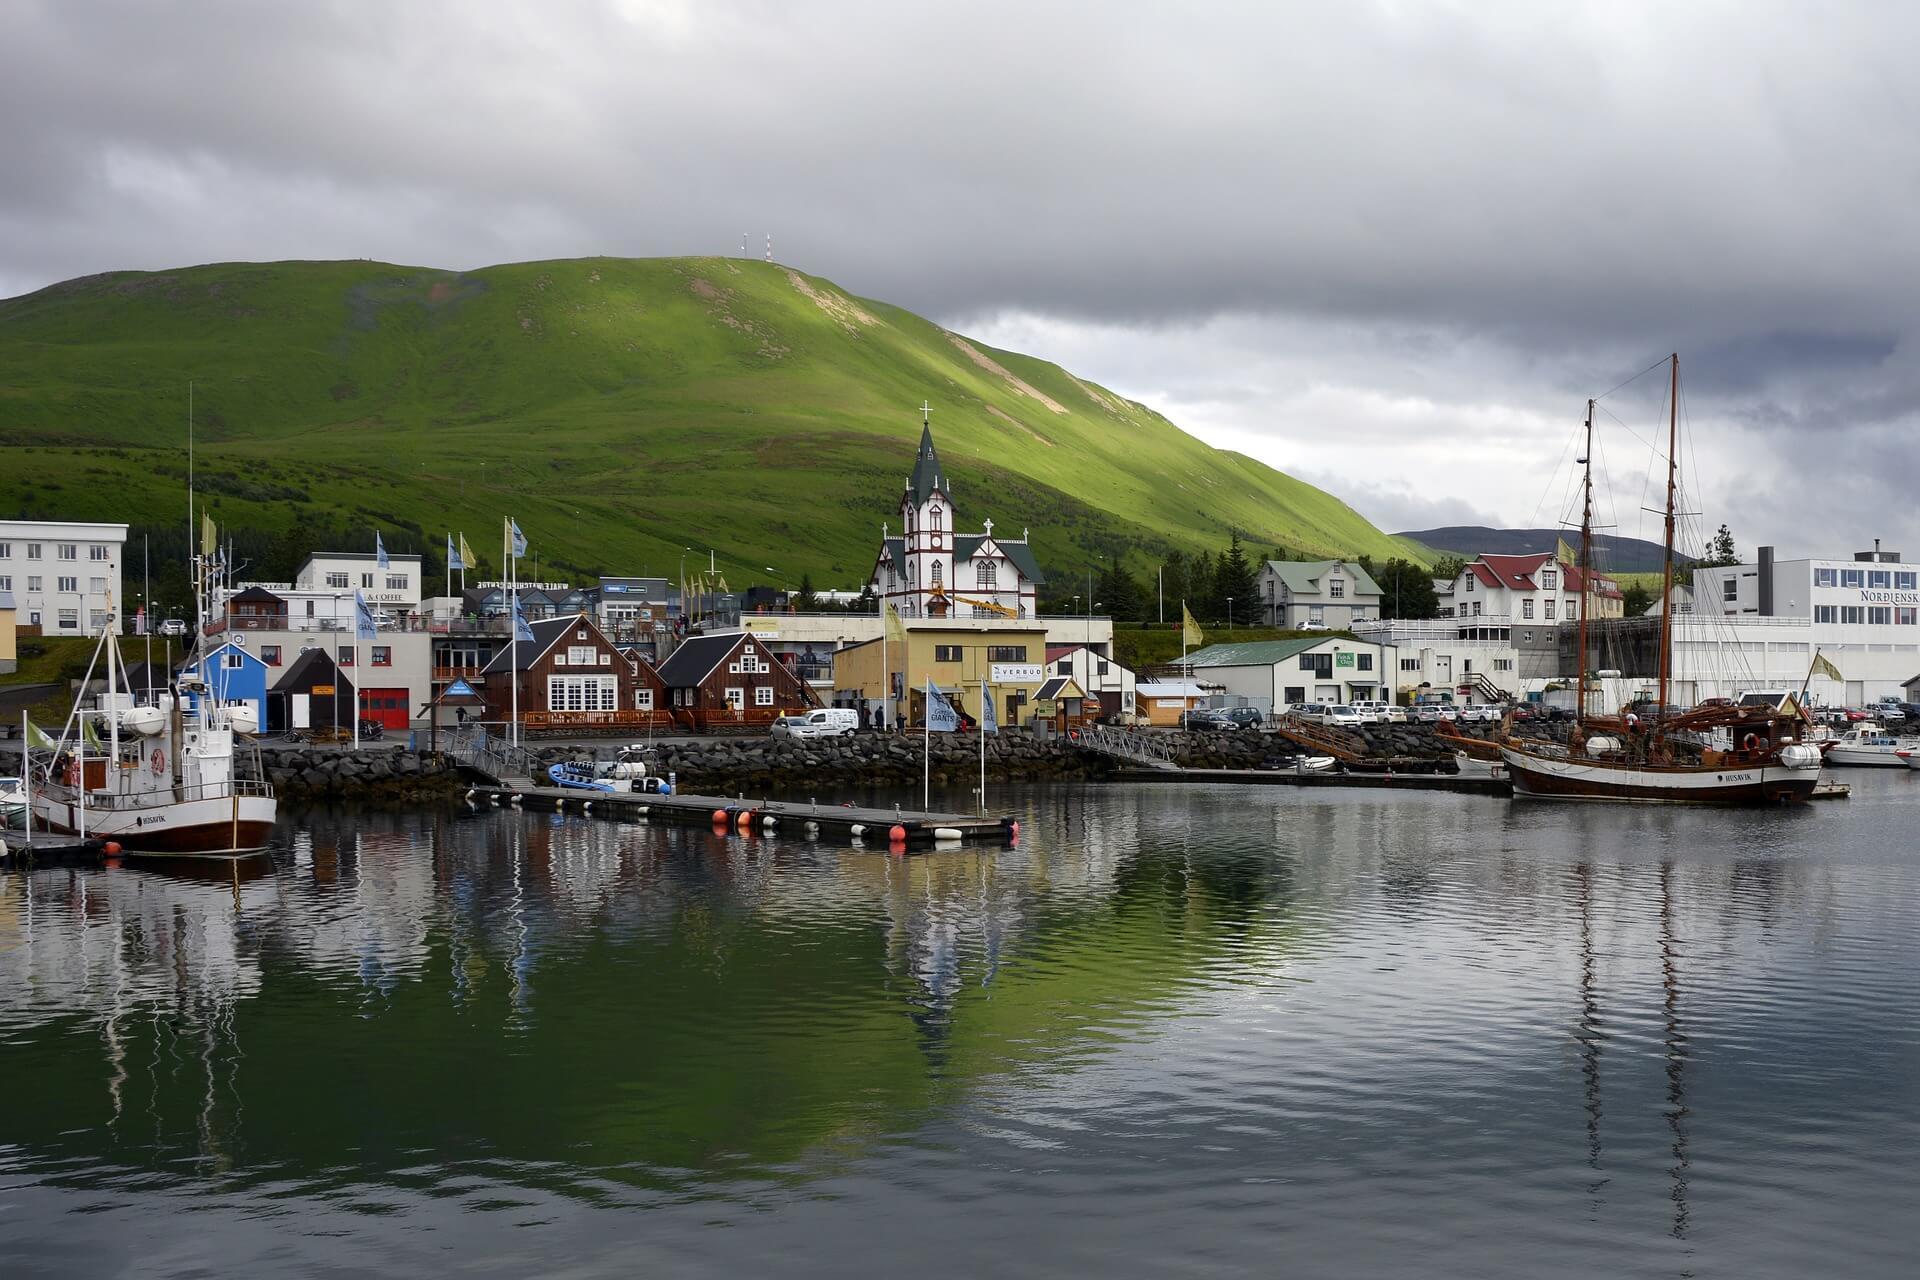 Husavik port with a big green hill and rain clouds. Great for families!